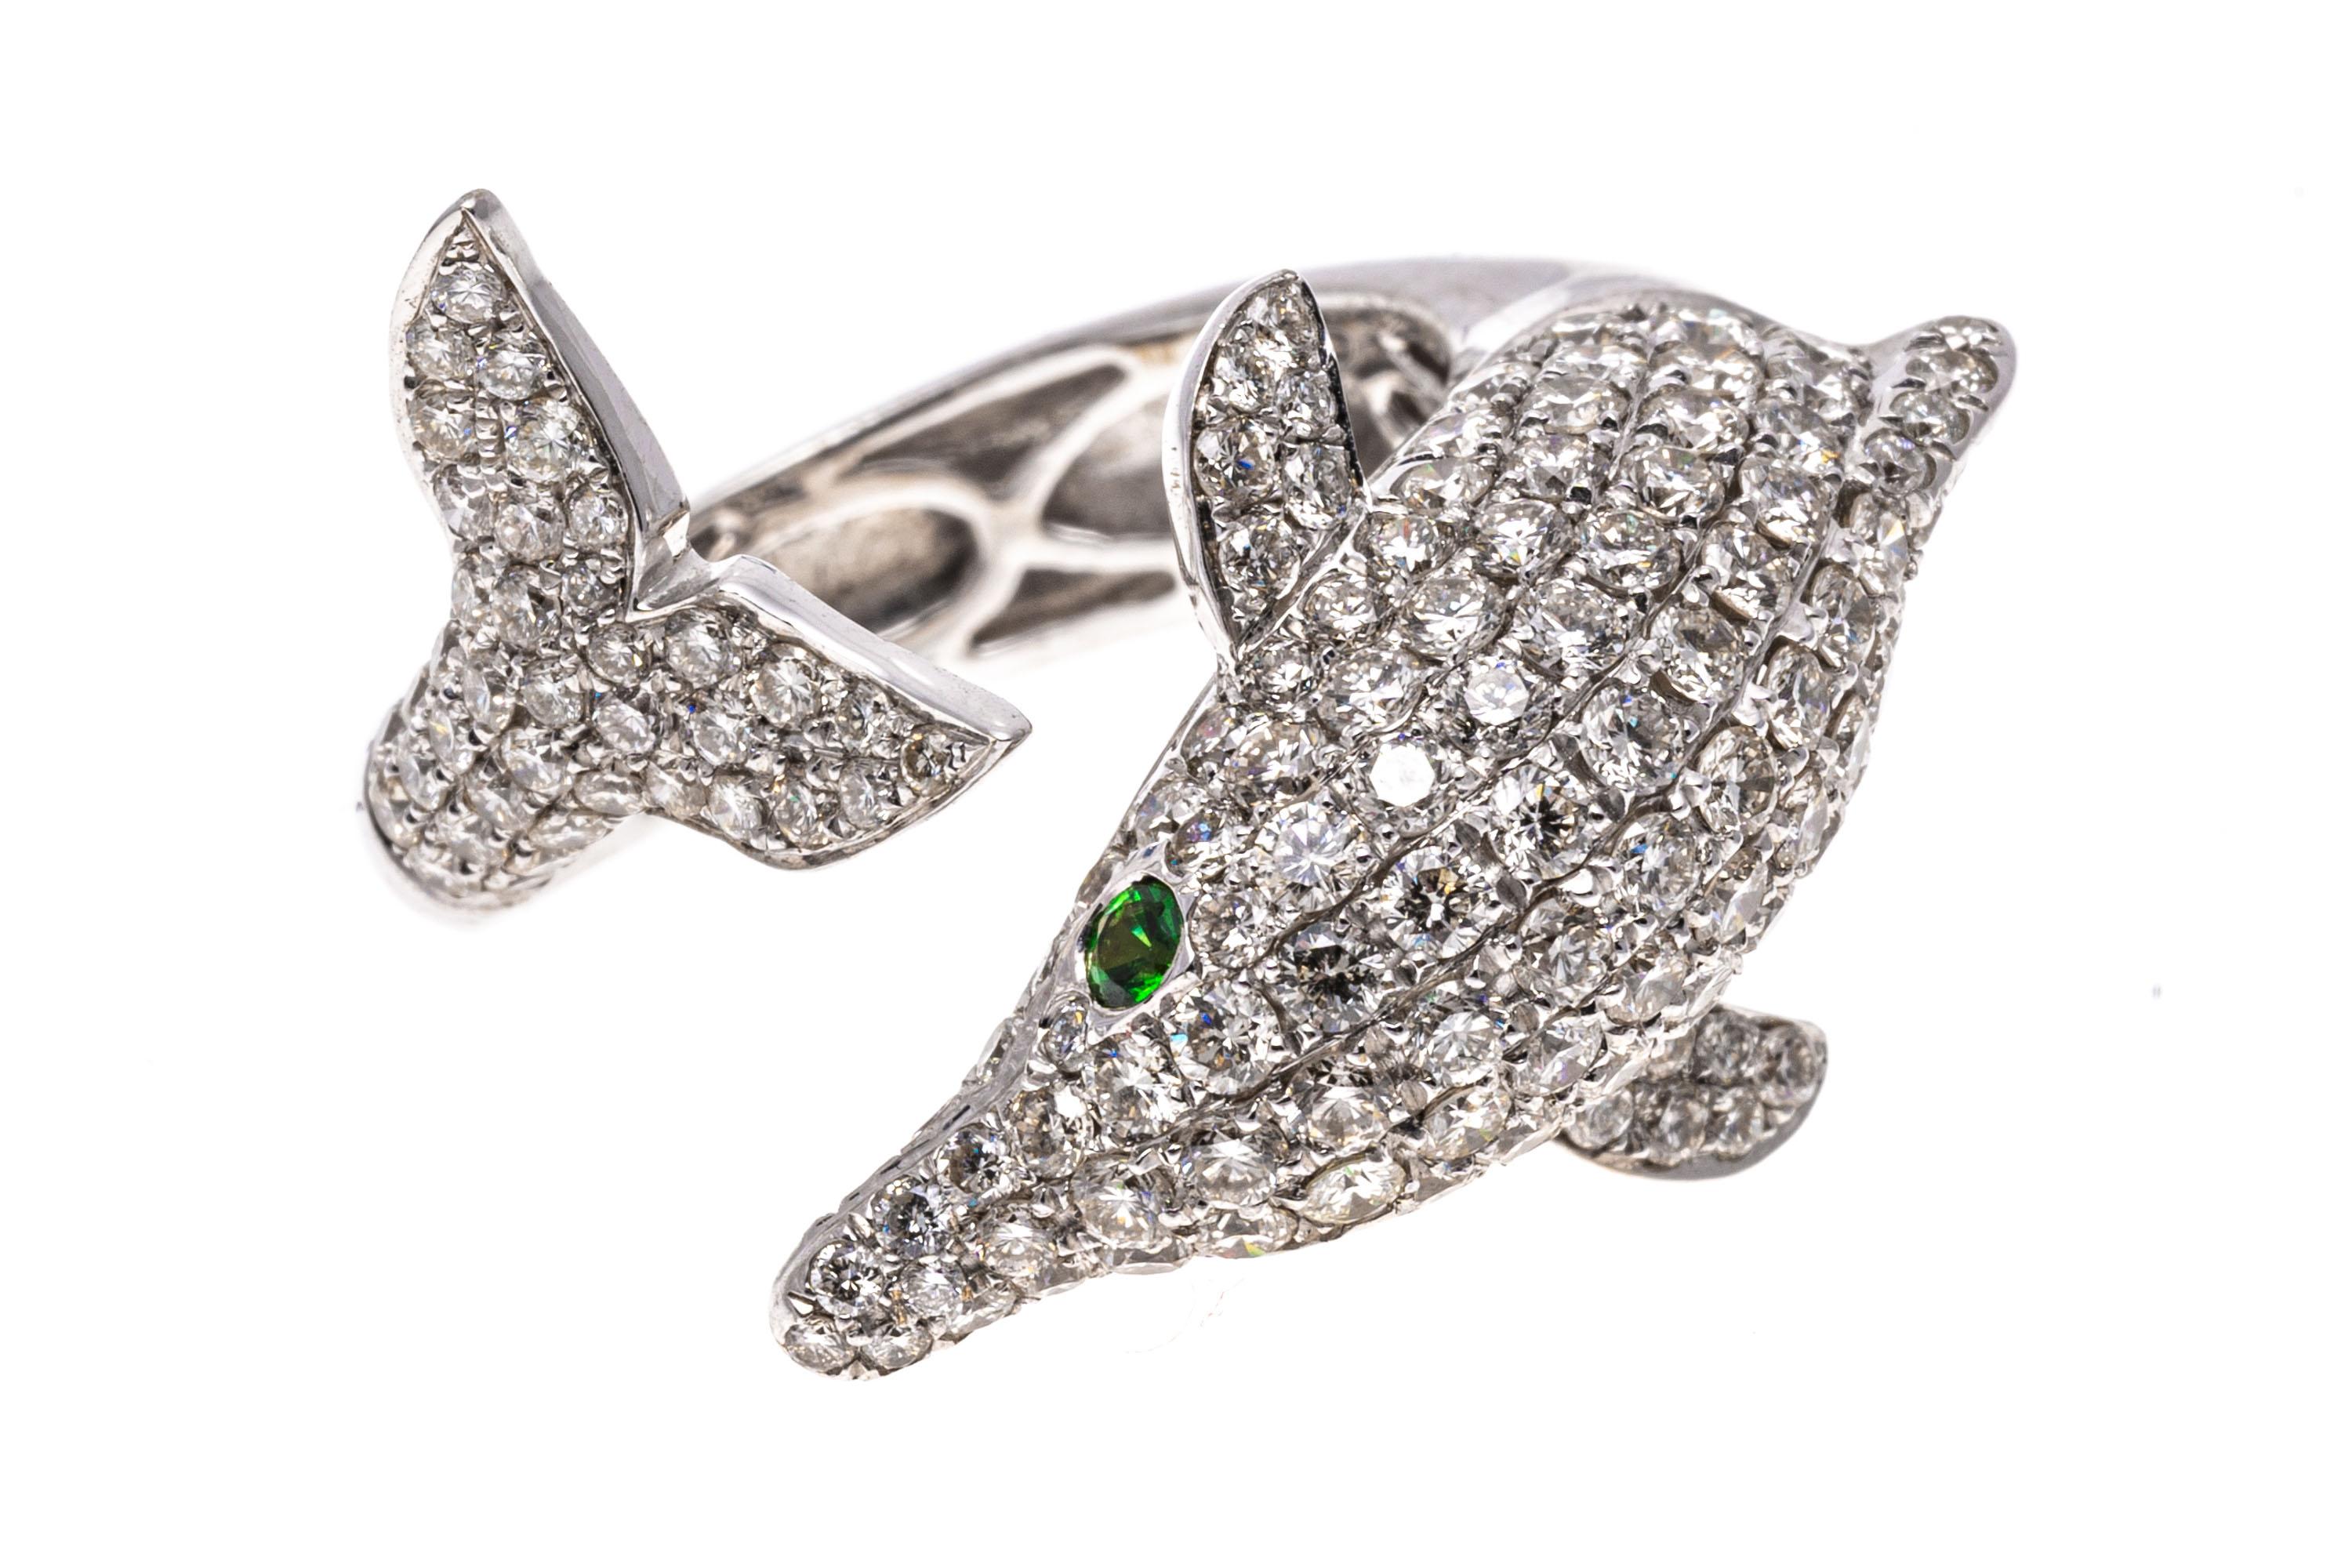 18k white gold ring. This gorgeous ring is a white gold, figural dolphin, with the head and tail as the bypass, pave set with round faceted diamonds, approximately 1.32 TCW. The ring is finished by round faceted, green tsavorite eyes, approximately